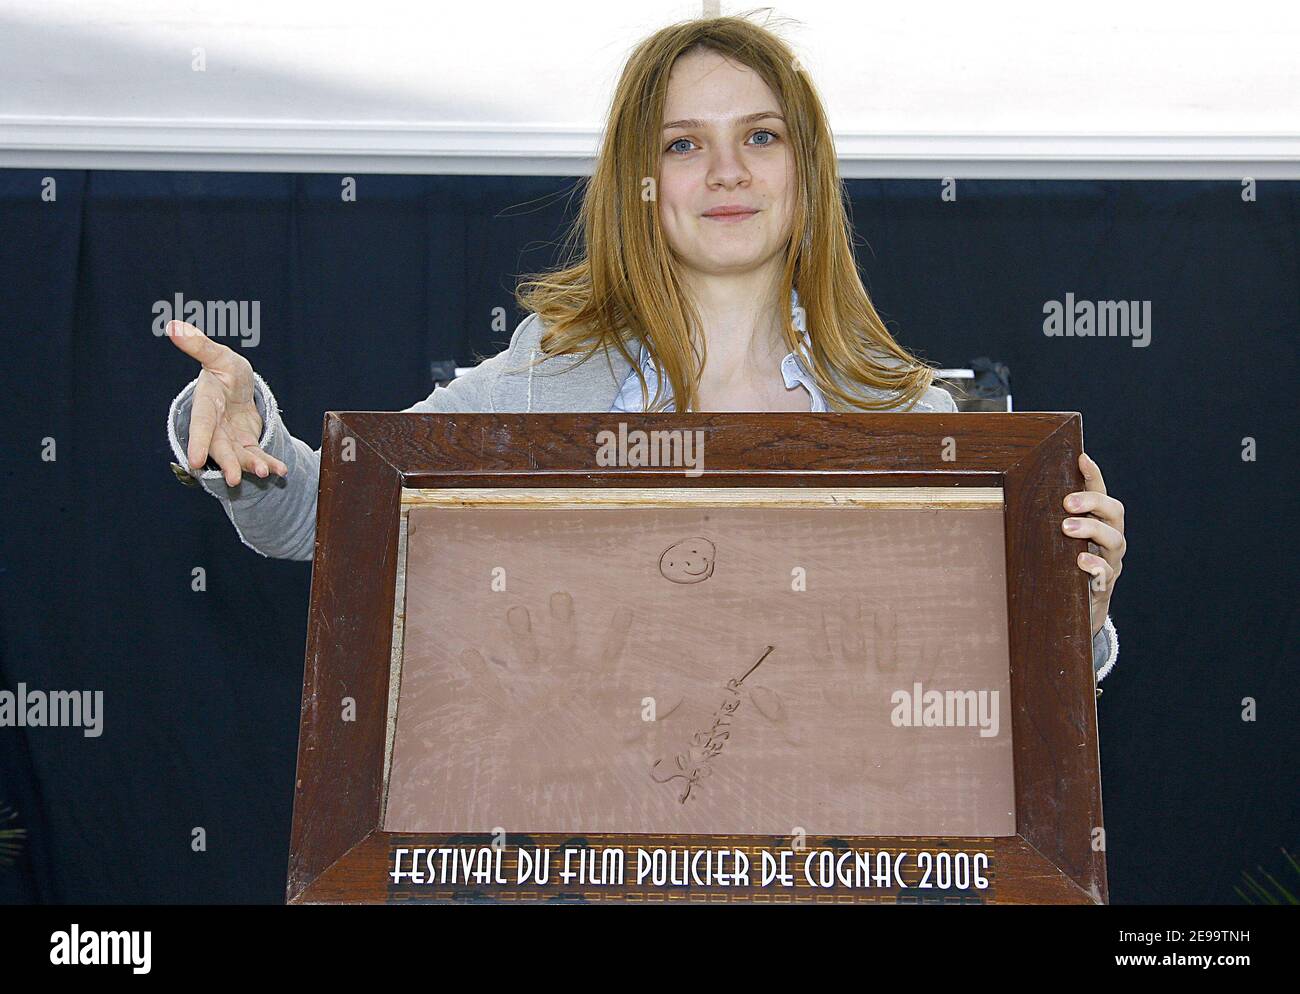 French actress Sara Forestier shows her hand-prints the 3rd day of the '24th Festival du Film Policier' (Mystery Film) held in Cognac, South-West of France on April 8, 2006. Photo by Patrick Bernard/ABACAPRESS.COM Stock Photo